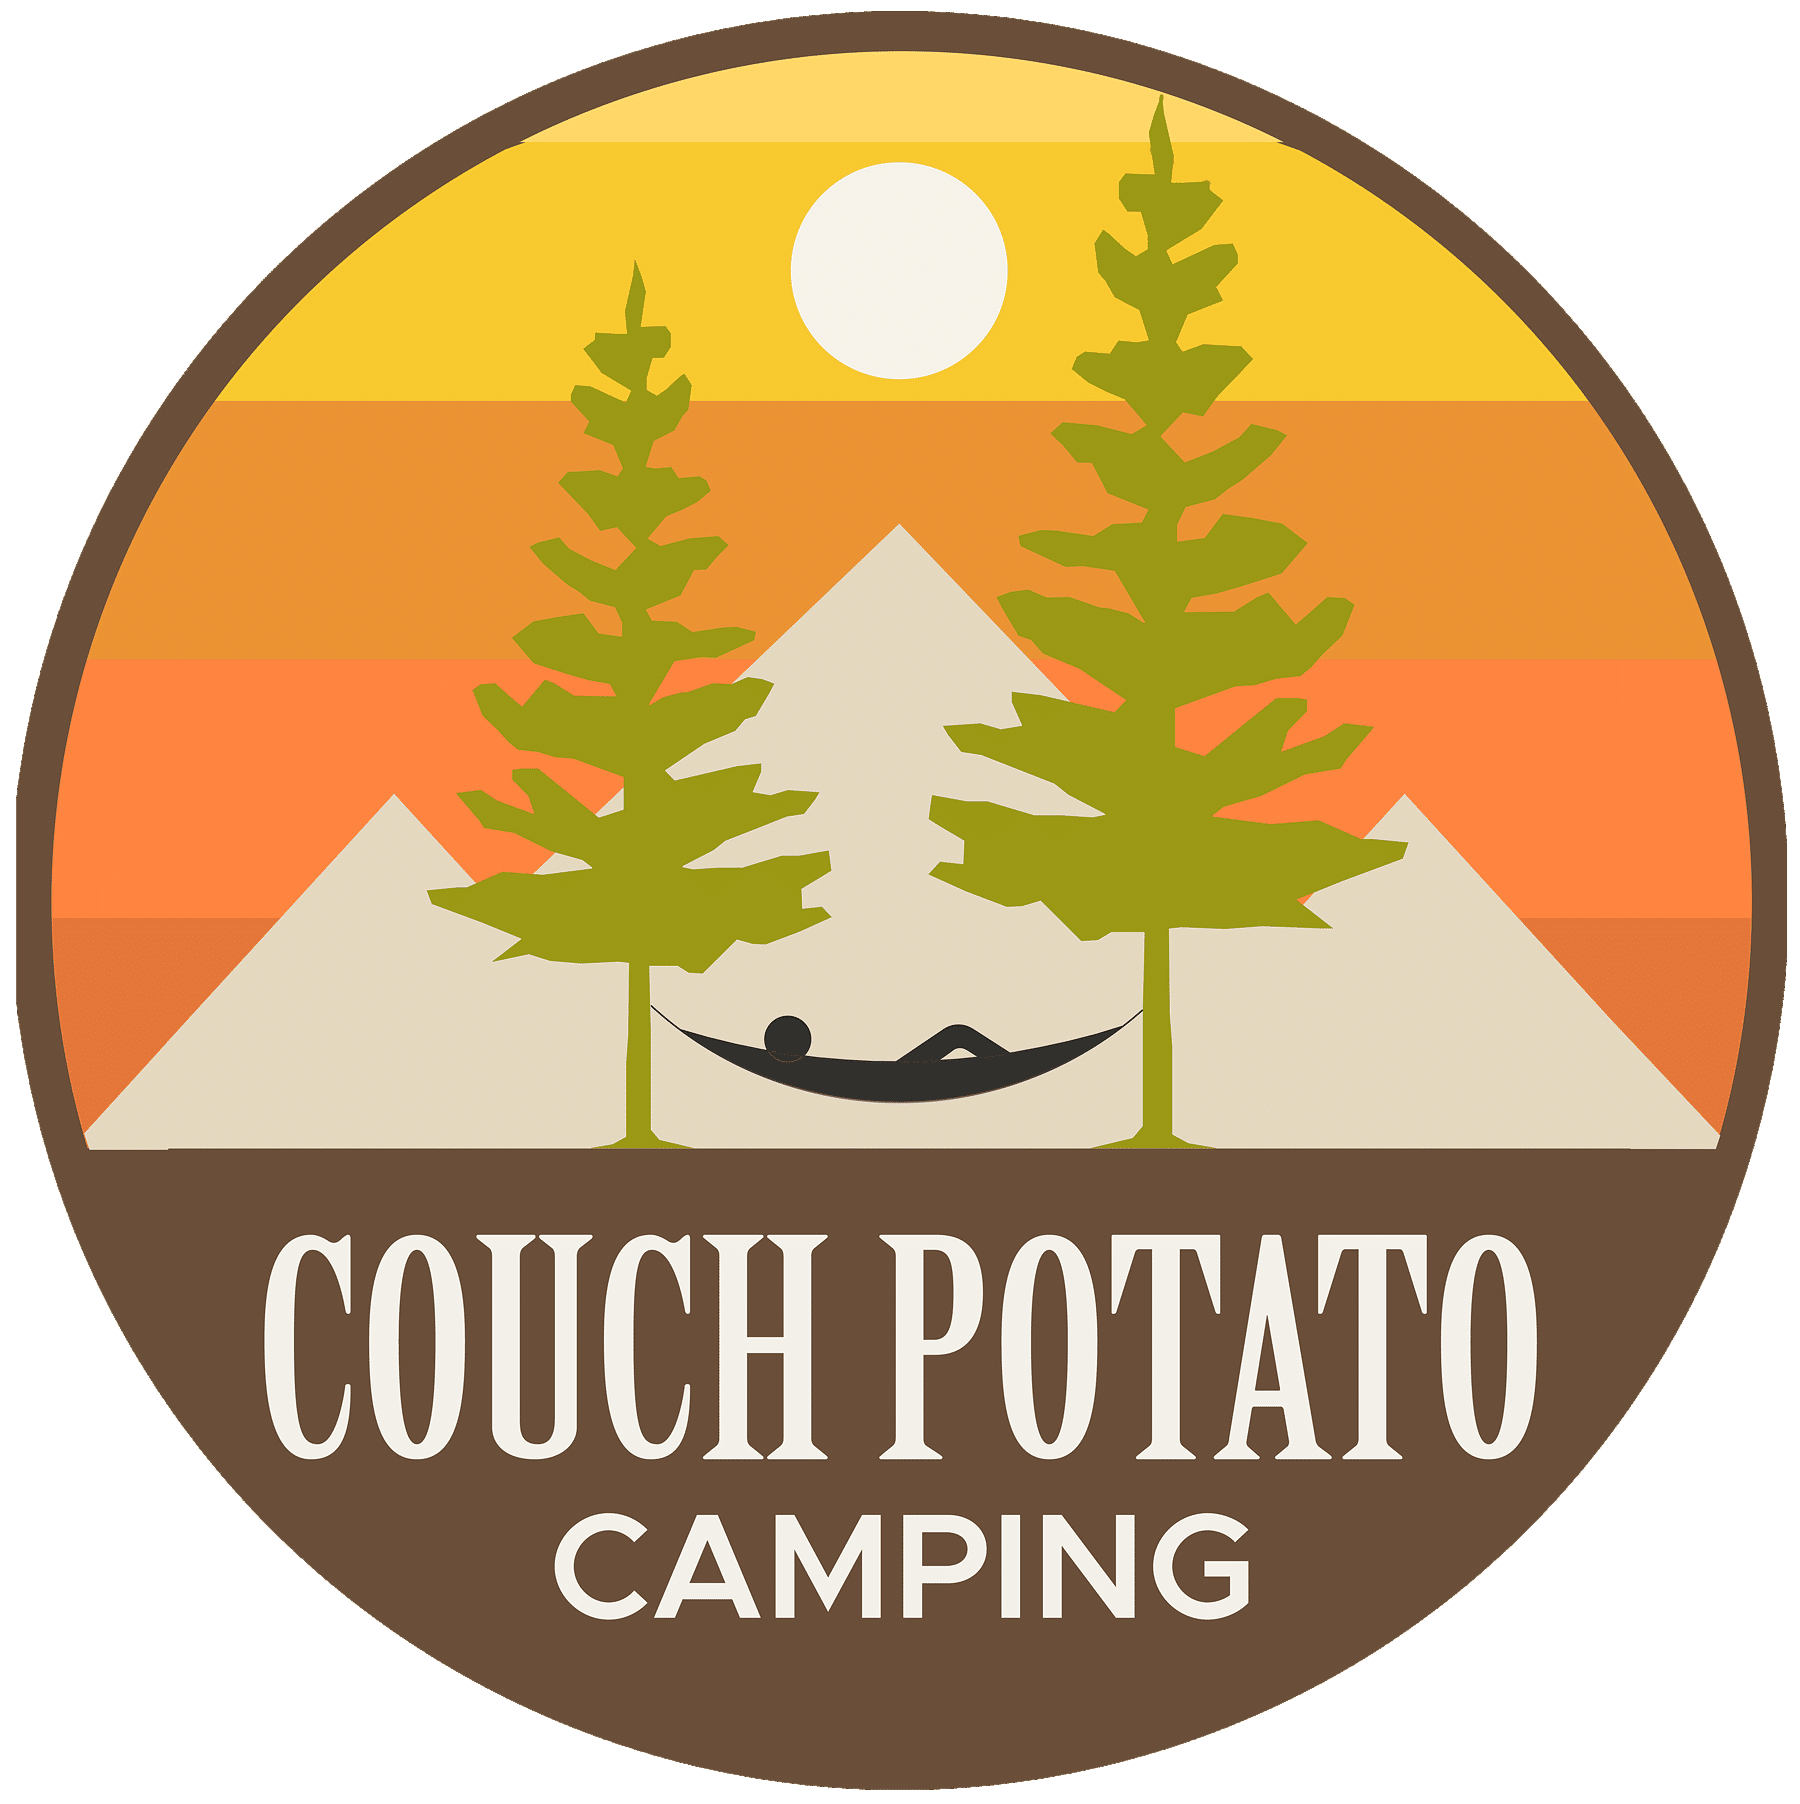 Couch Potato Camping